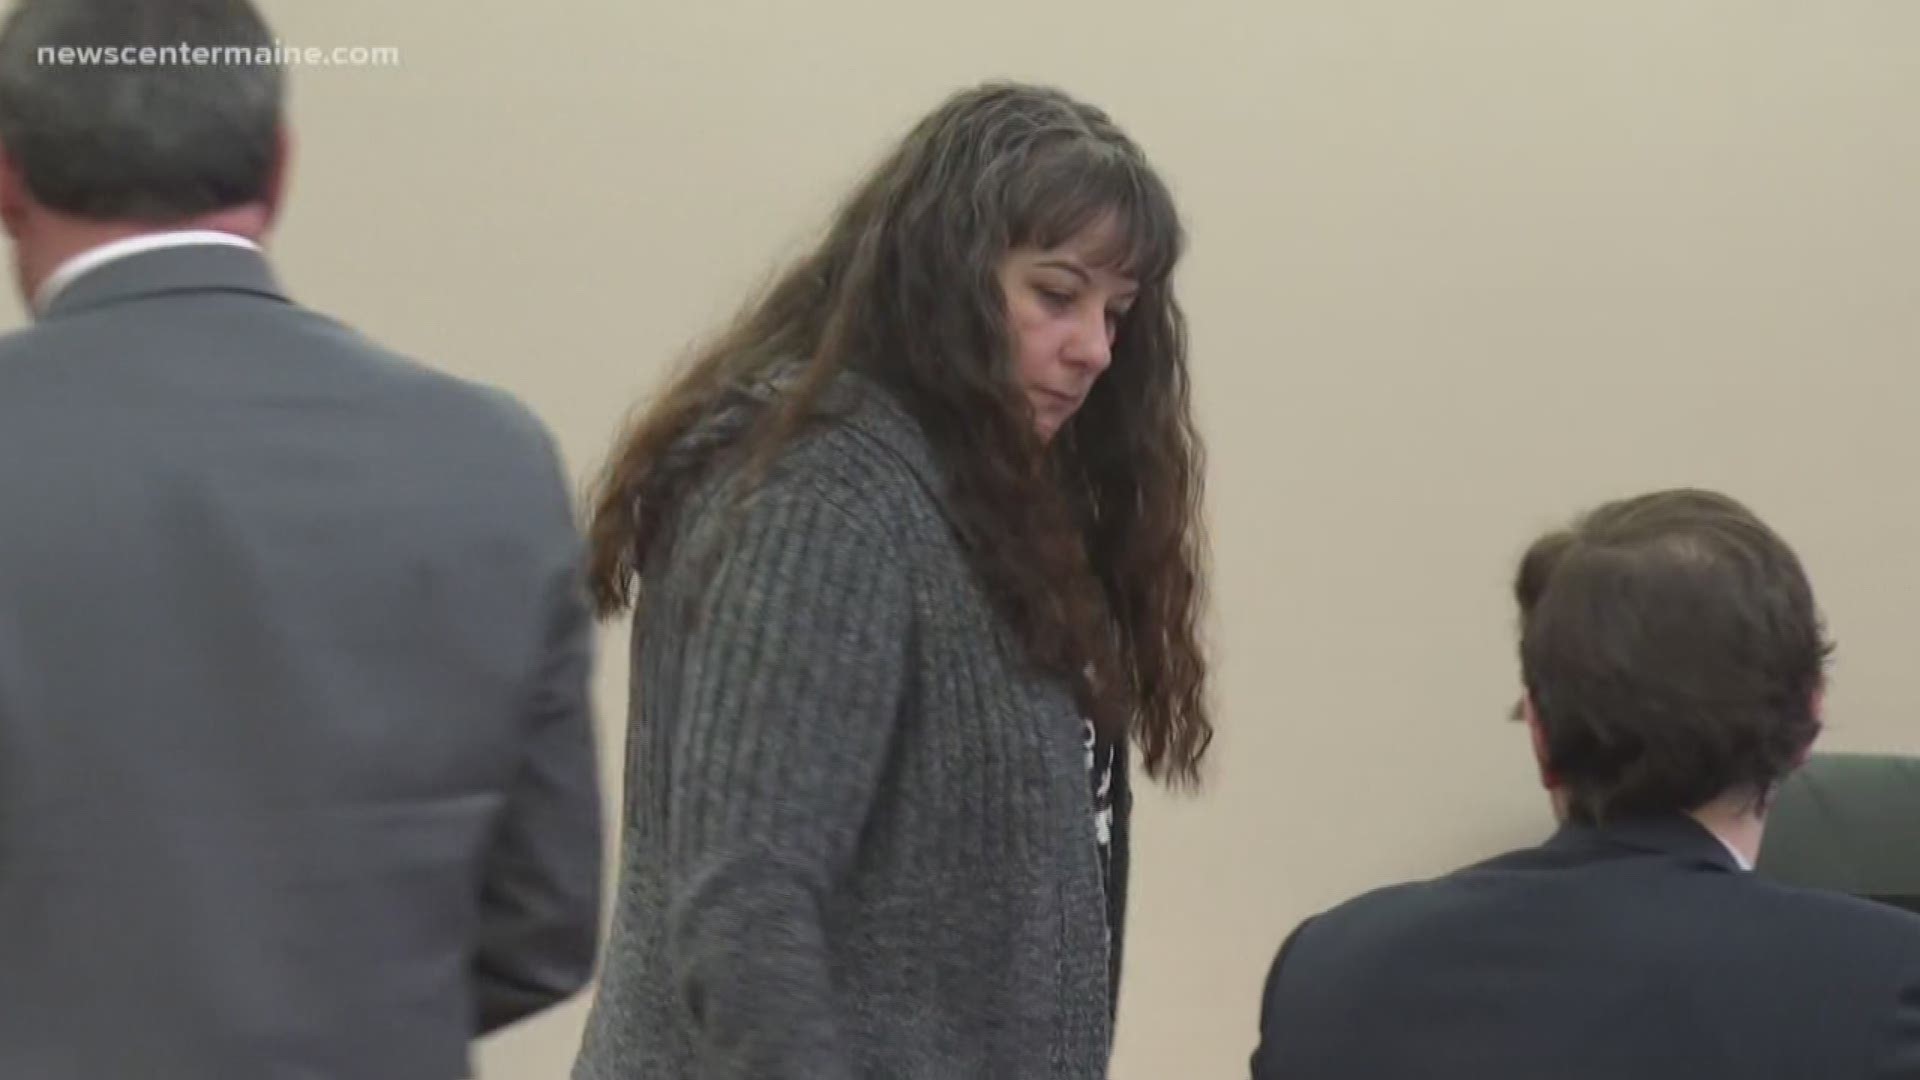 The trial for Shawna Grotto, the woman accused of killing four-year-old Kendall Chick, continued Tuesday.